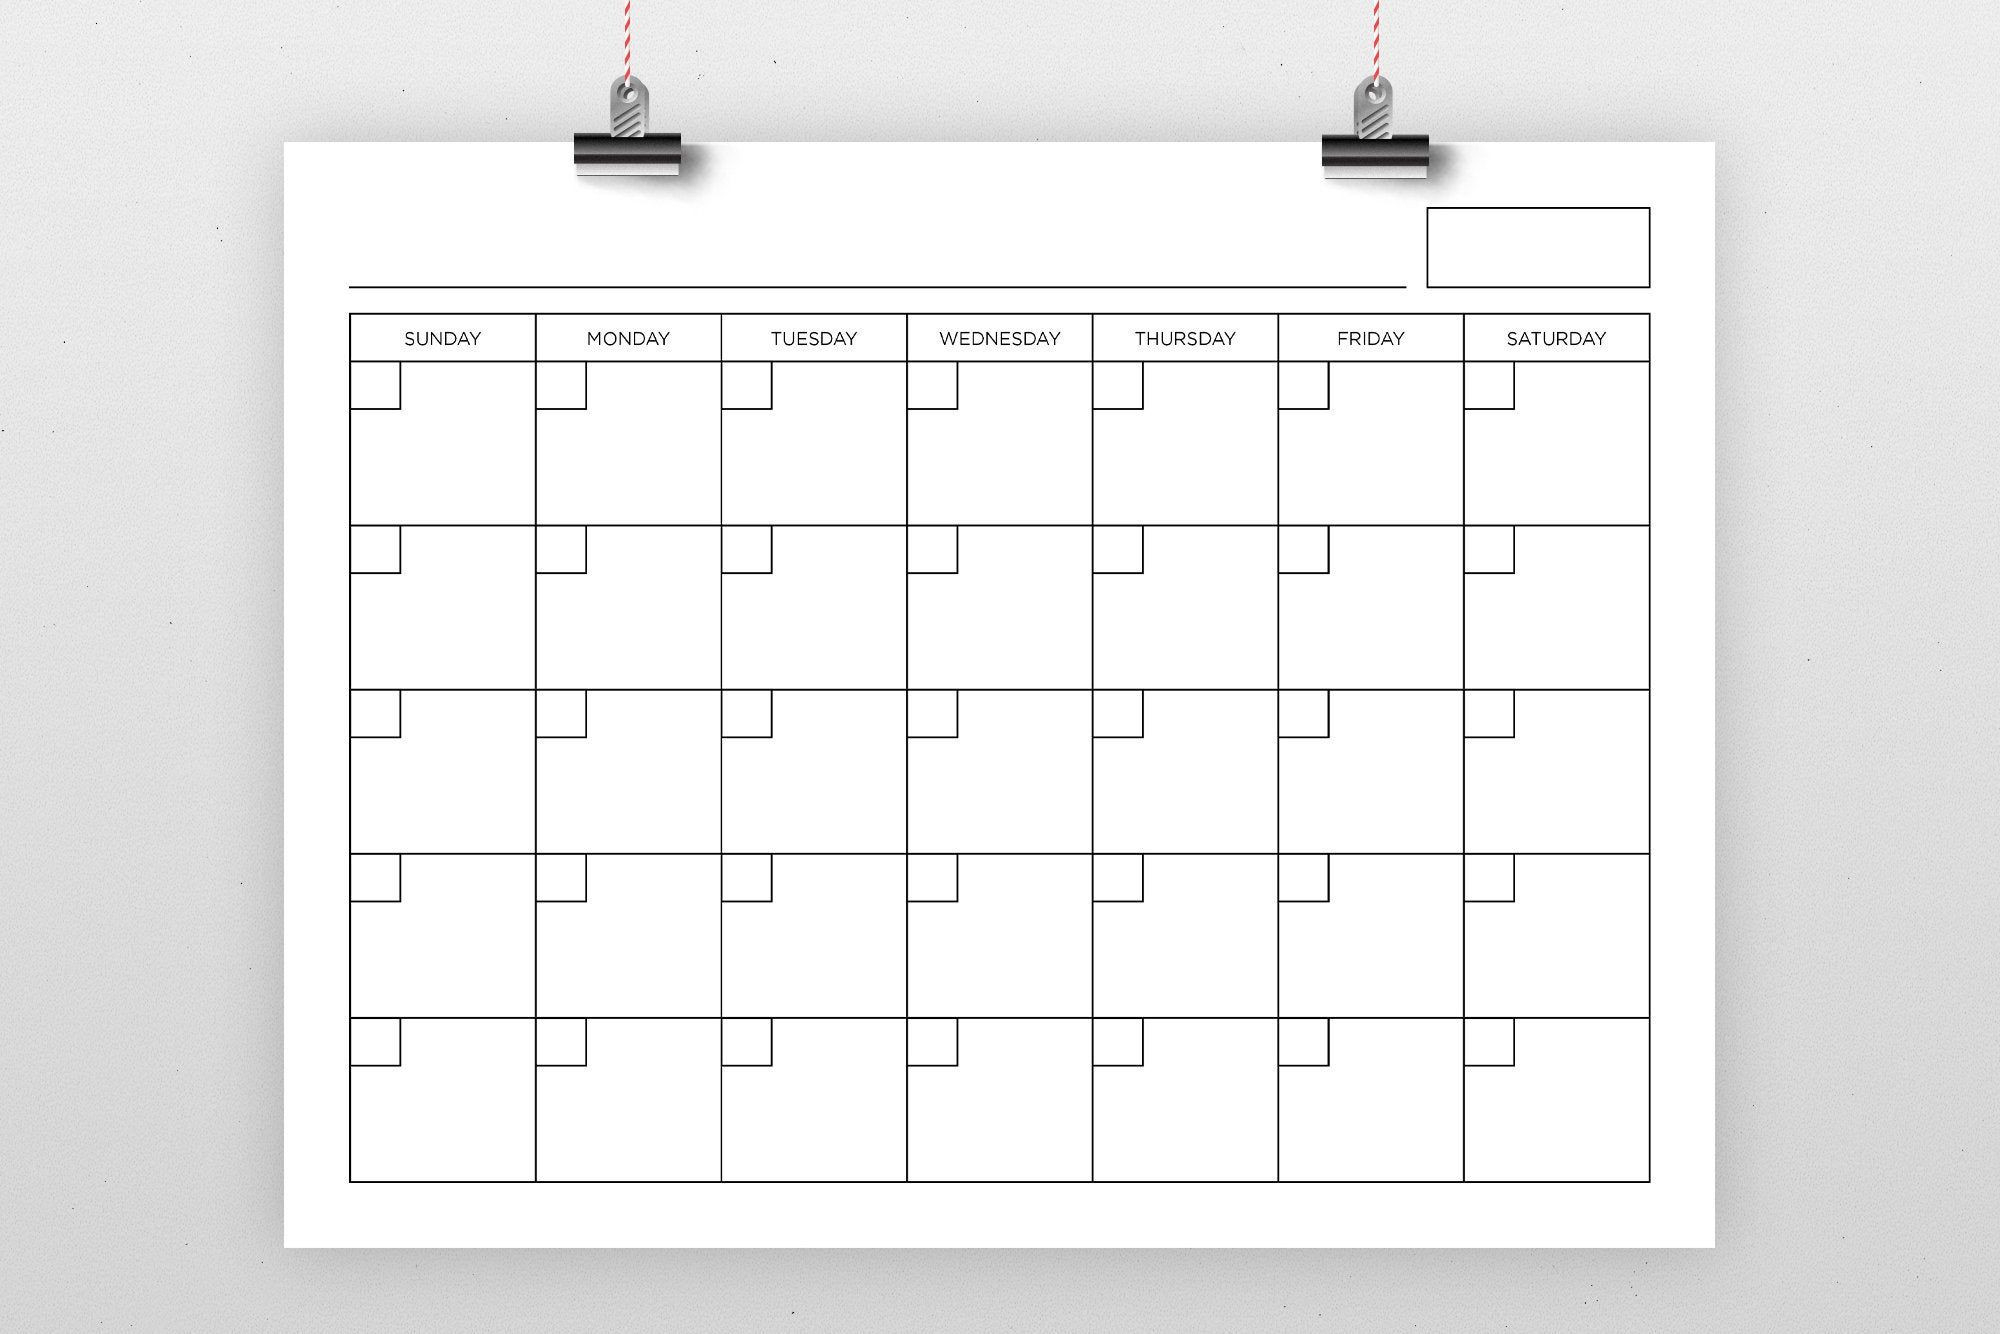 8.5 X 11 Inch Blank Calendar Page Template Instant-Printable 81/2 X 11 June 2021